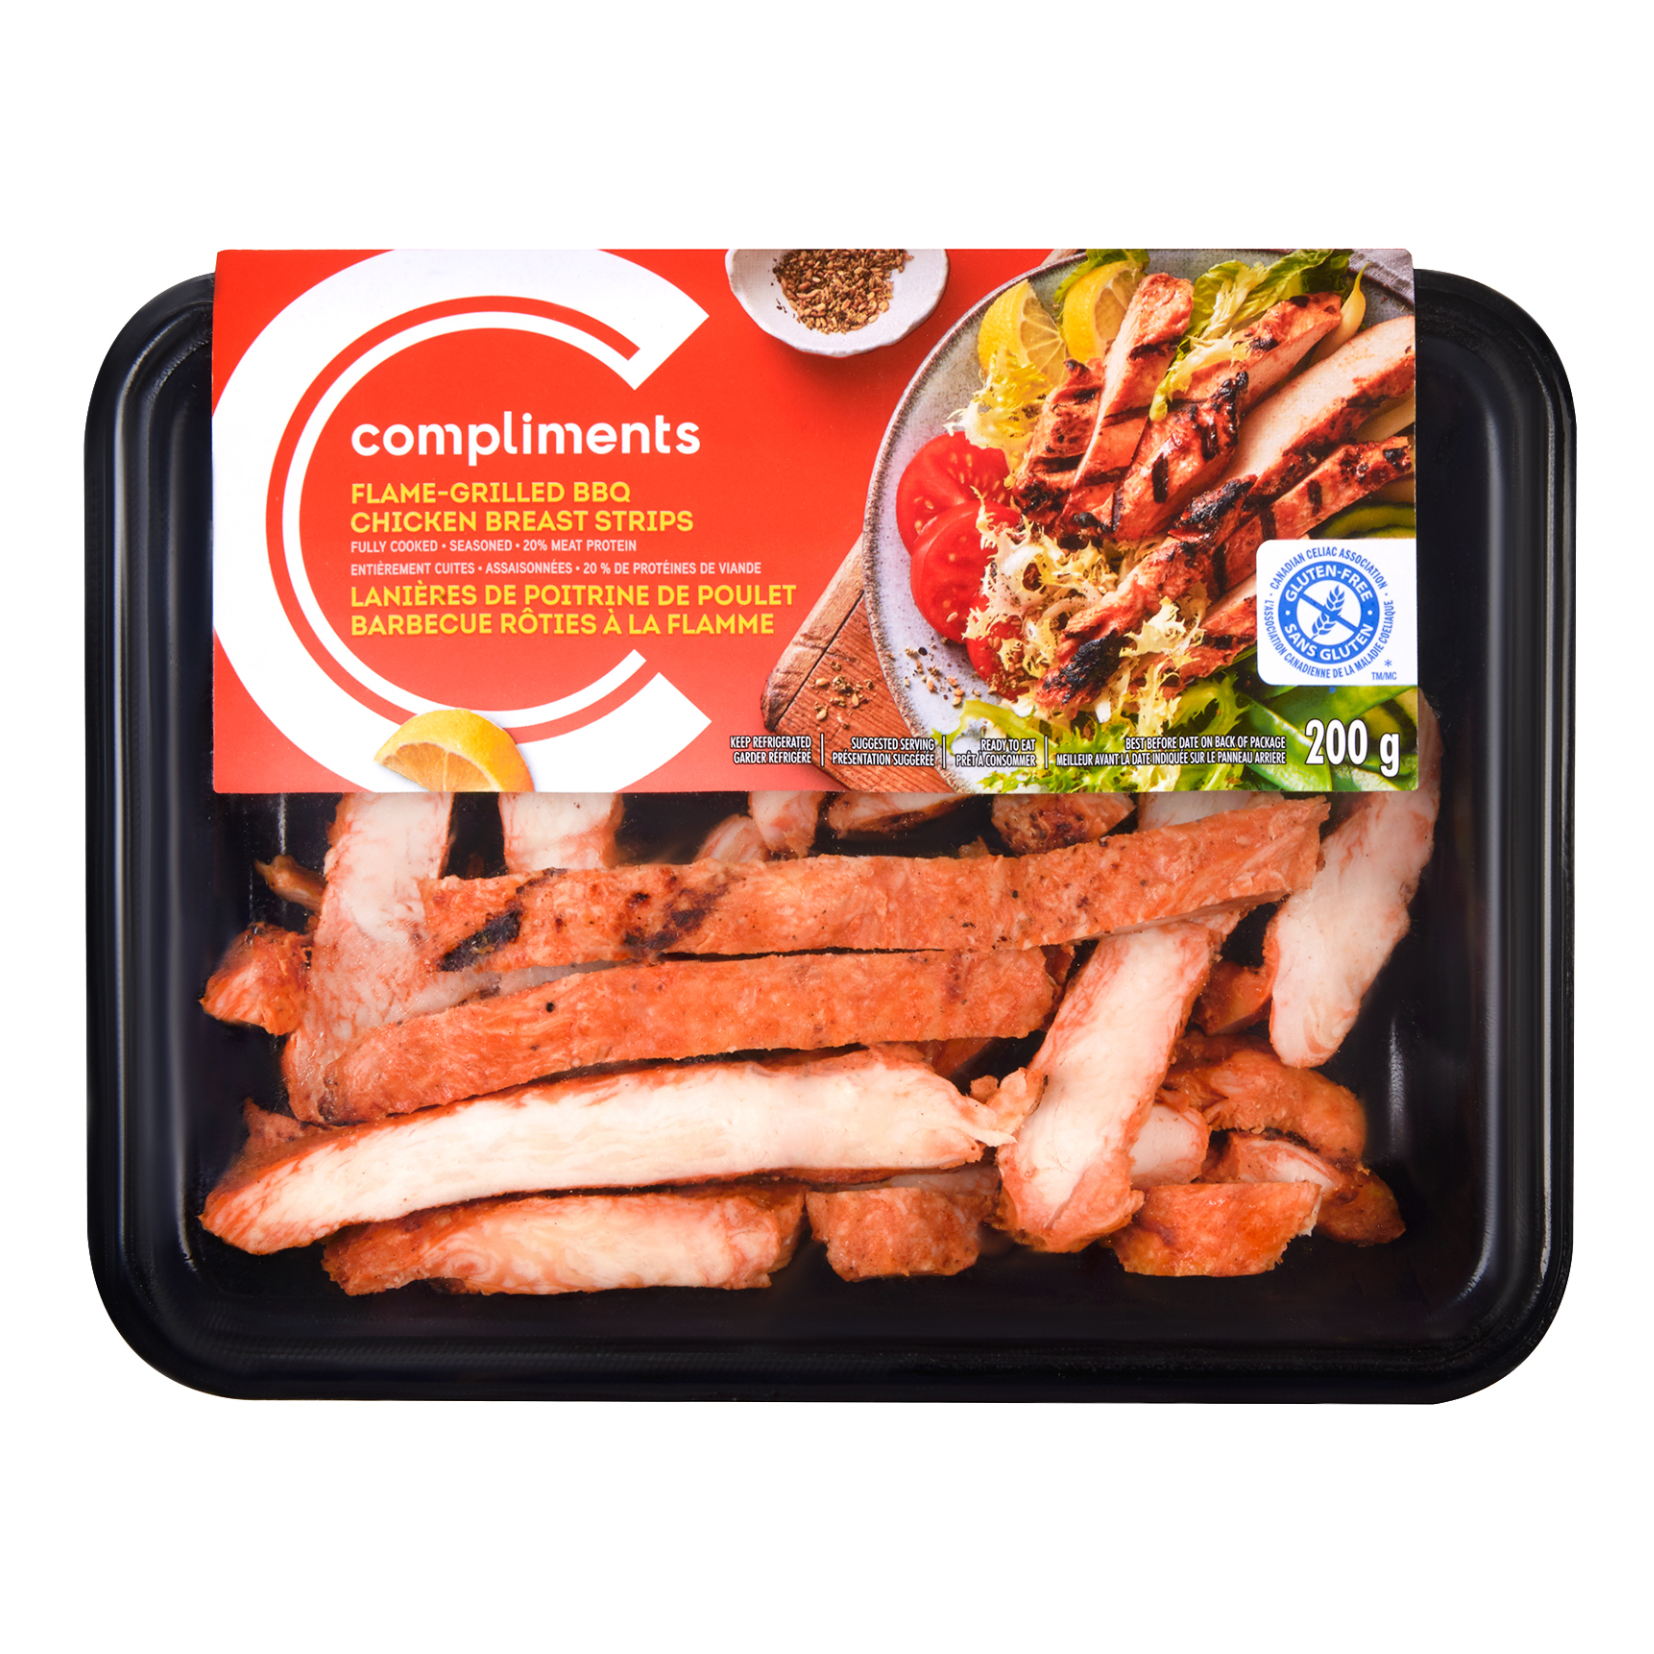 Compliments Flame-Grilled BBQ Chicken Breast Strips 200g